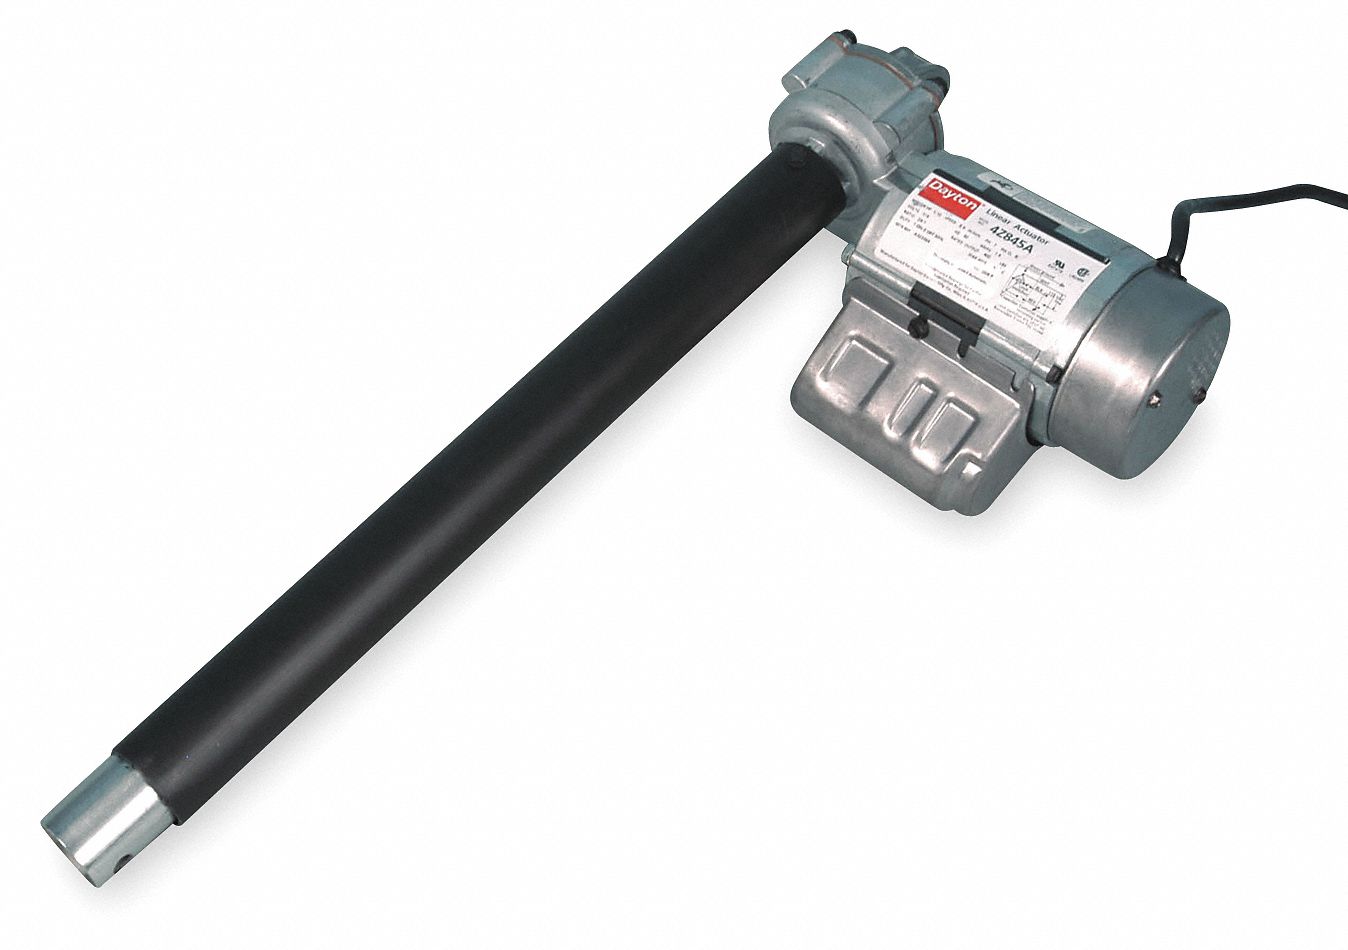 DAYTON Linear Actuator, 400 lb Rated Load, 12 in Stroke Length, 8.4 in